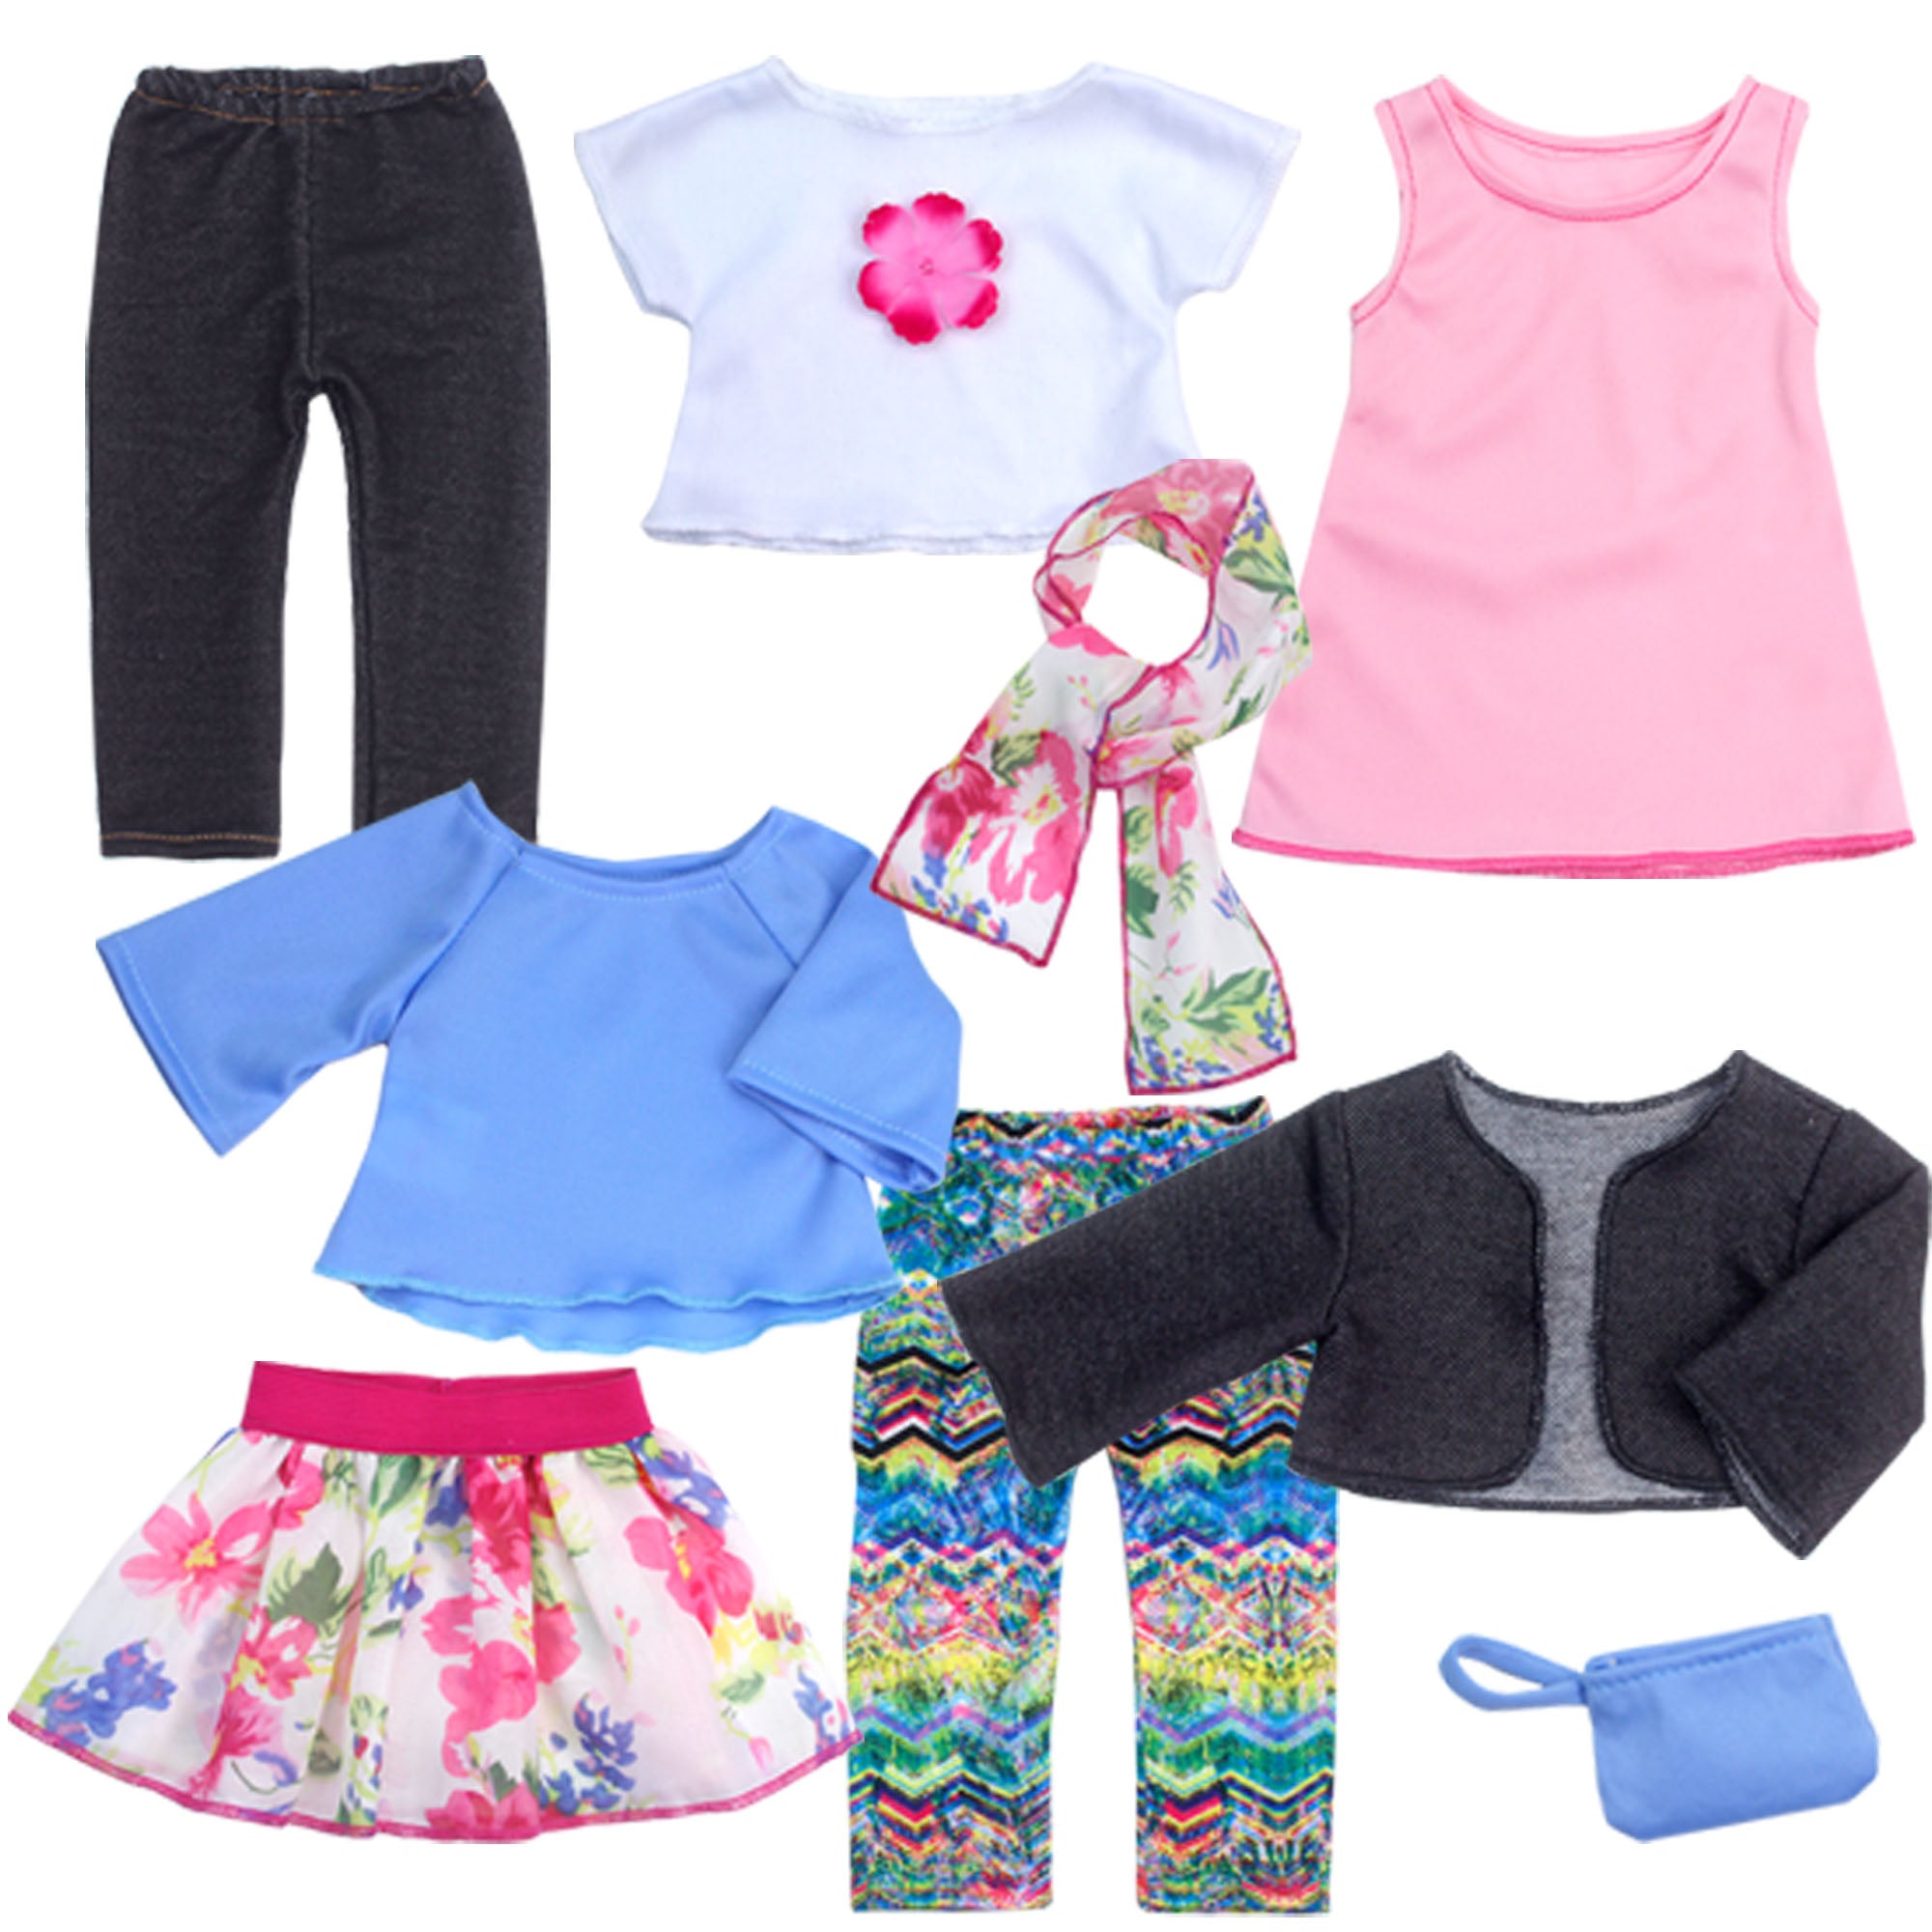 Sophia's 9 Piece Spring Wardrobe Mix and Match Set with Accessories for 18" Dolls, Pink/Blue